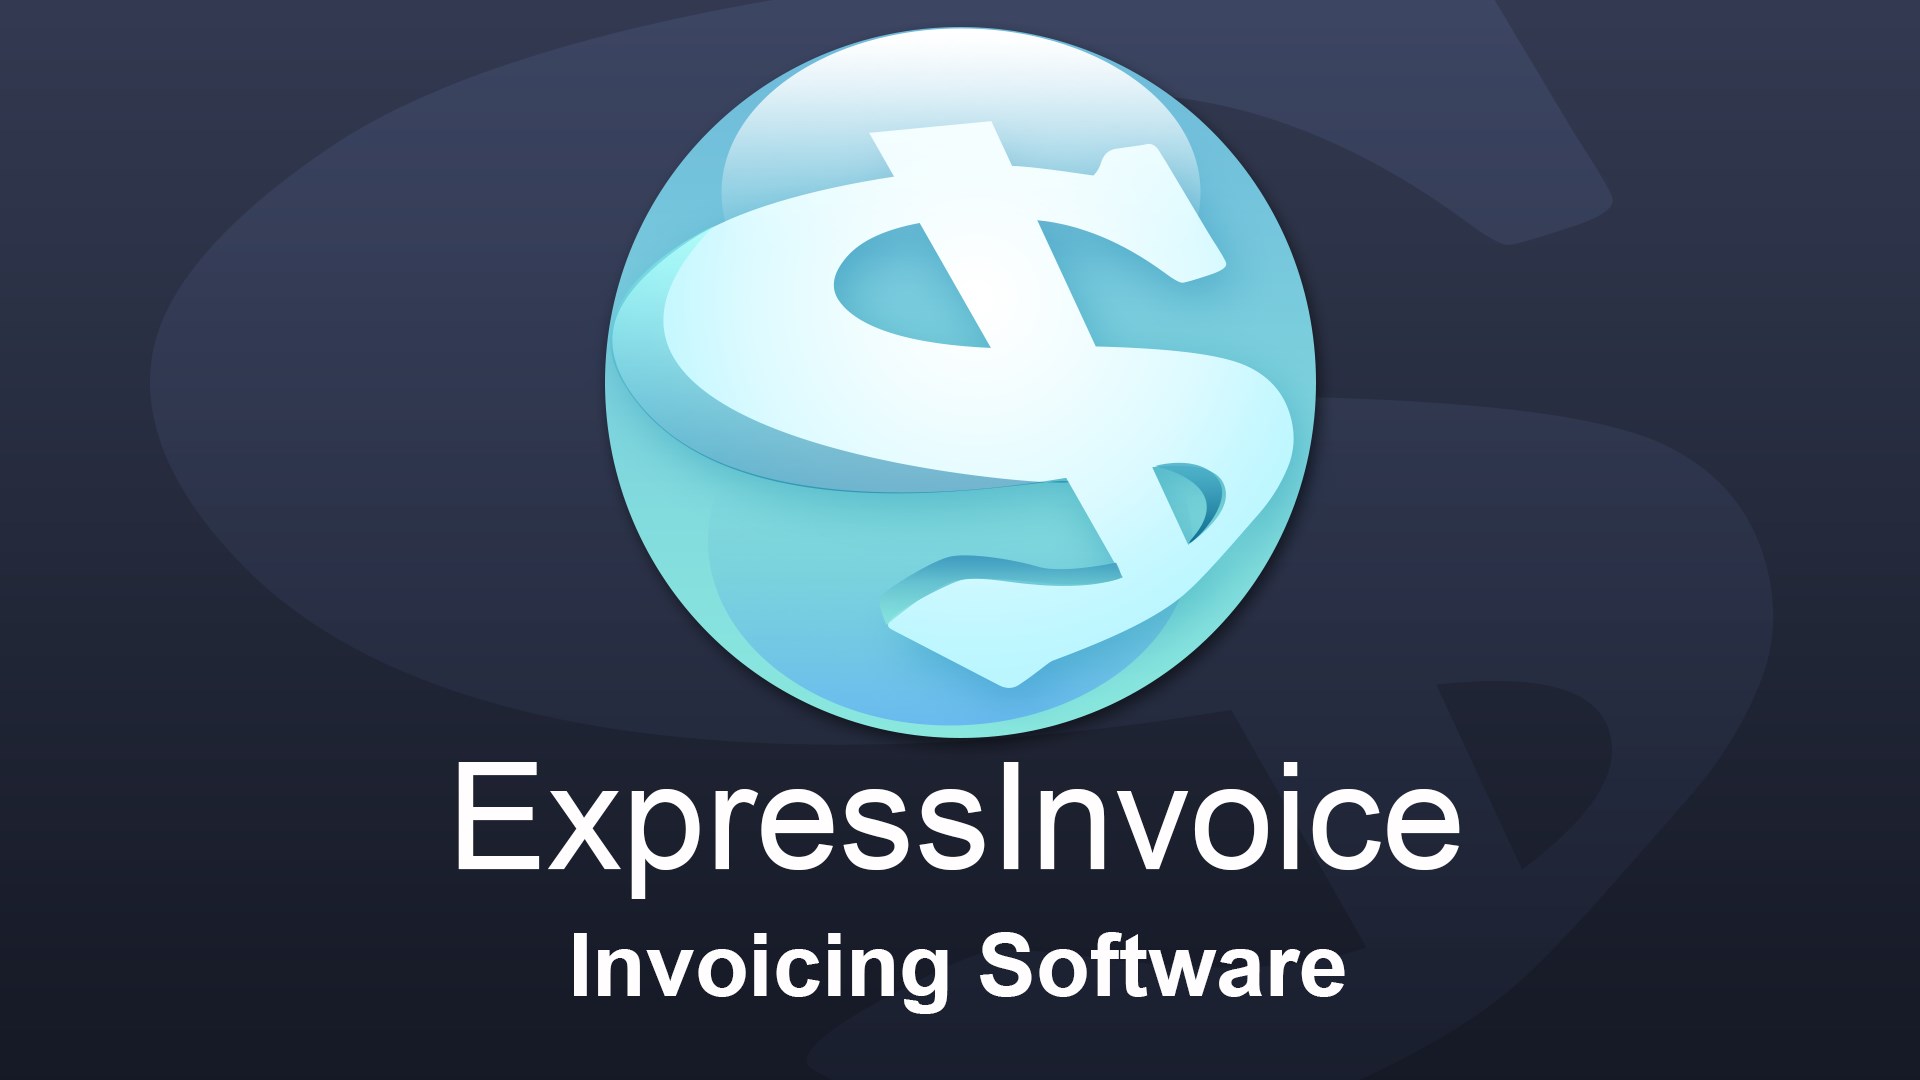 NCH: Express Invoice Invoicing Key 203.62 USD